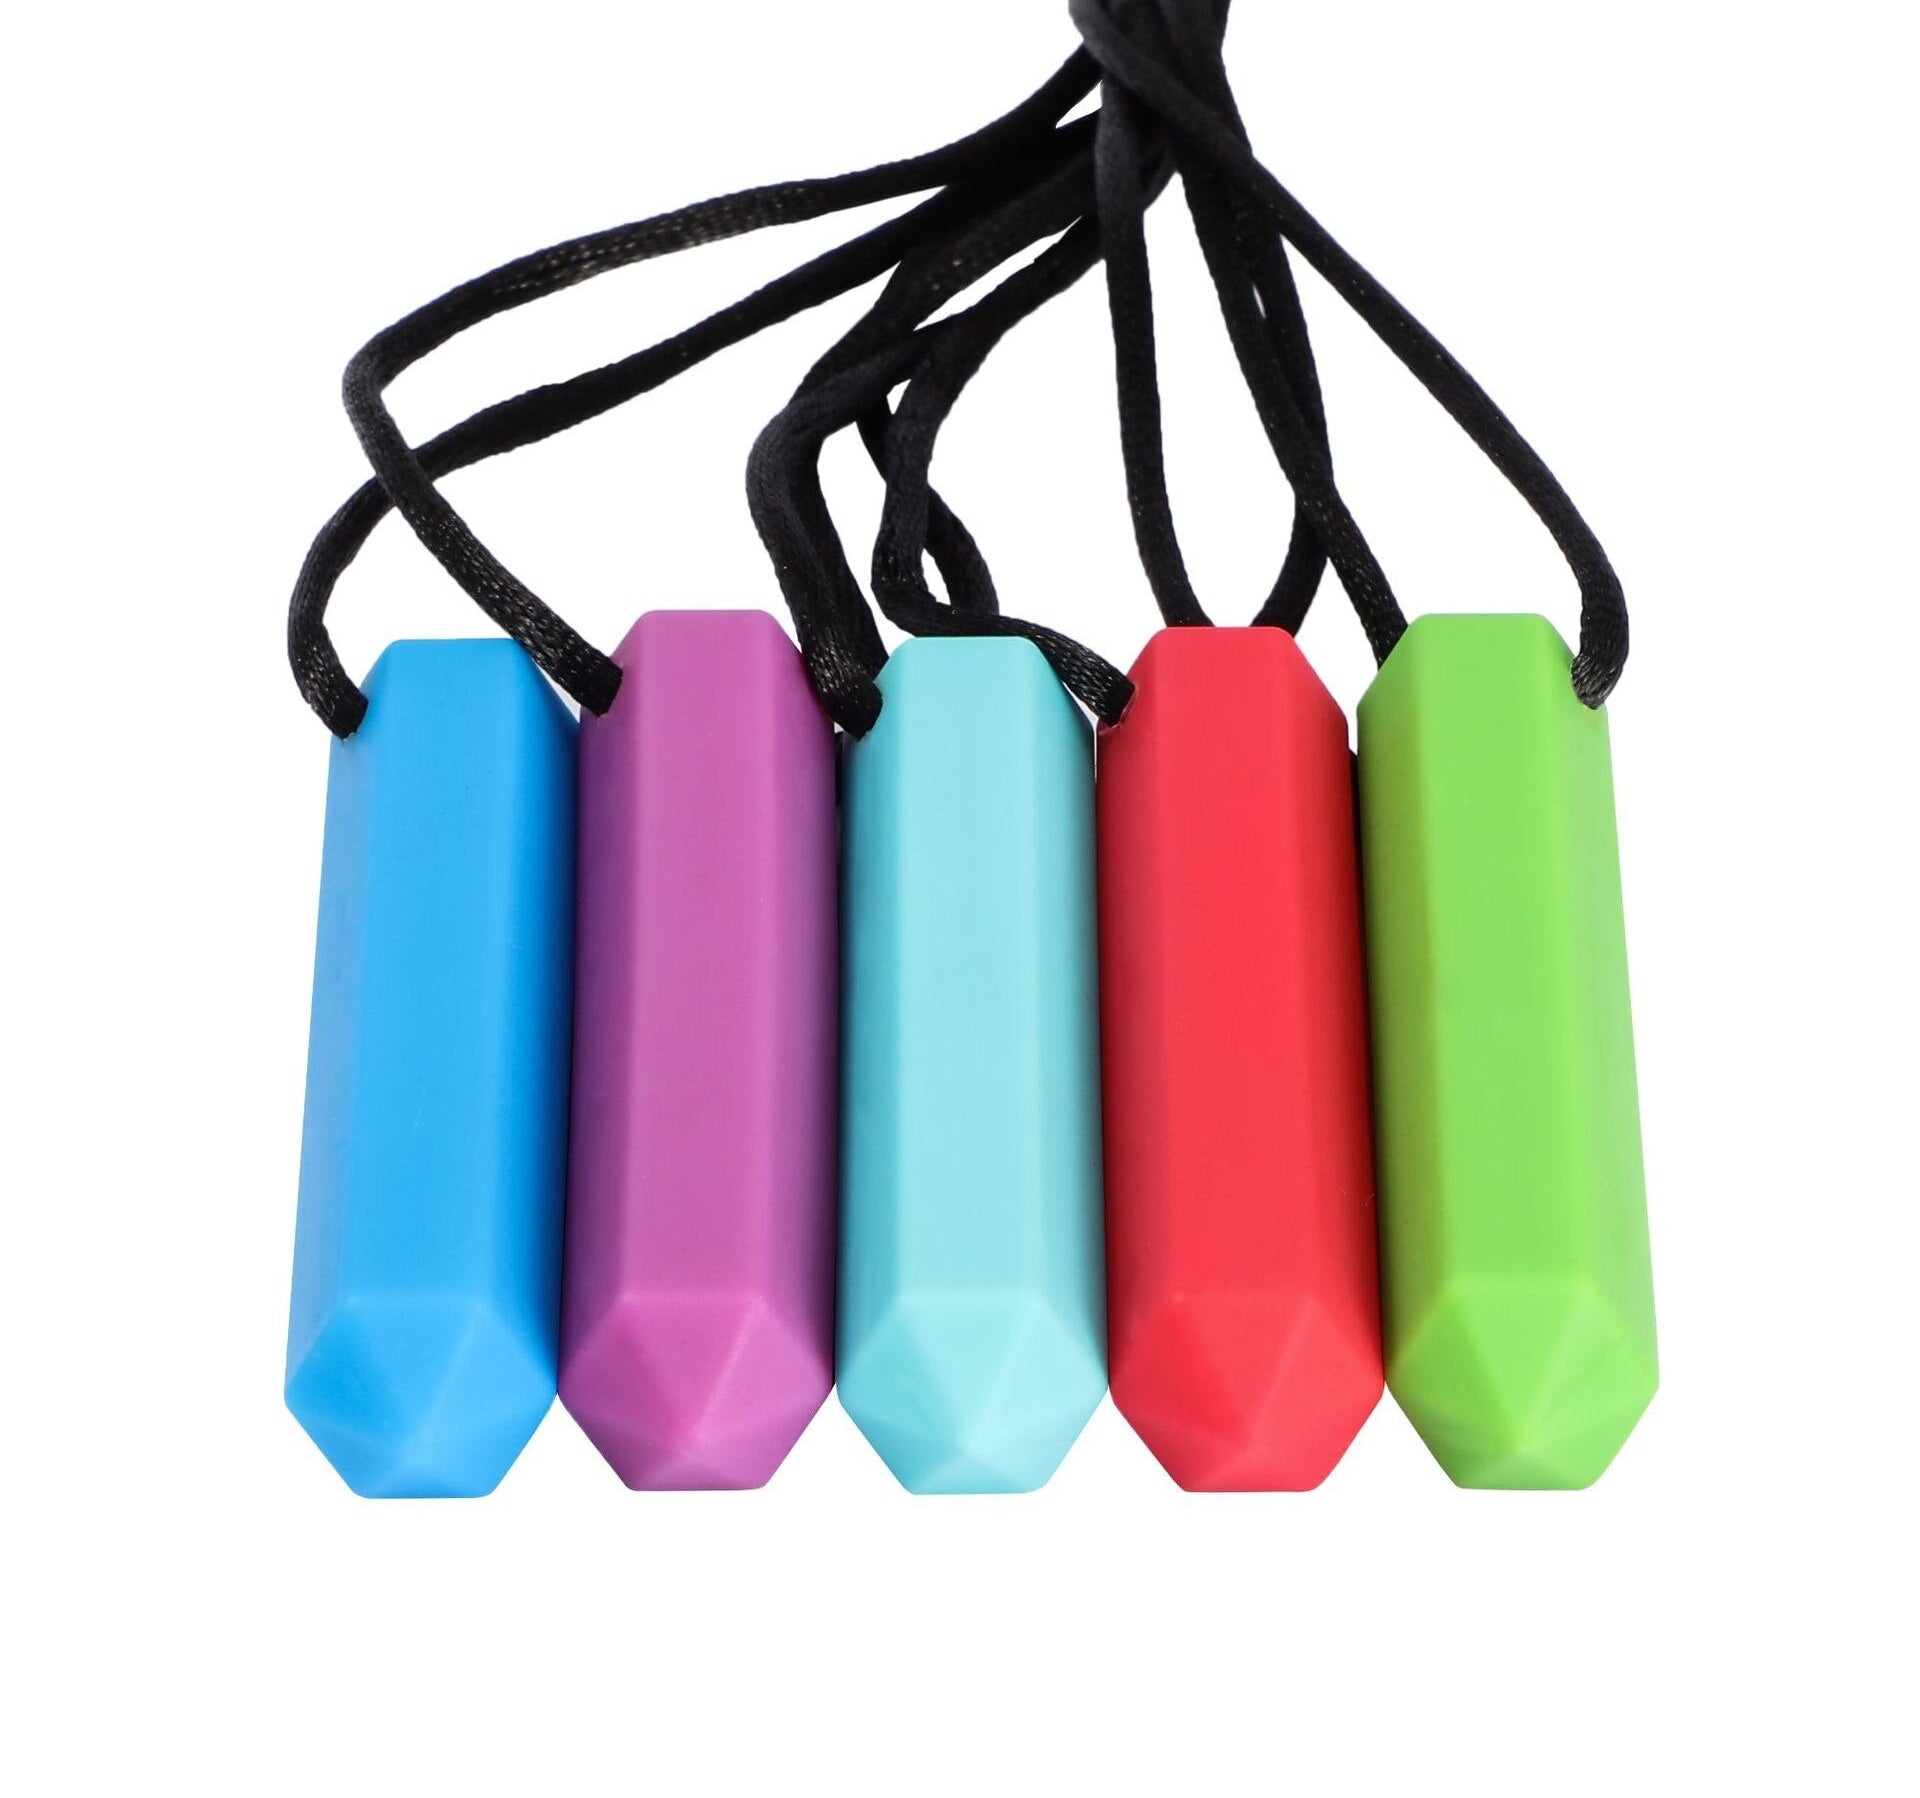 5 Colors Silicone Baby Teether Autistic Children&#39;s Sensory Chewing Silicone Teether Pendant Necklace Molar Stick Bite Toys 0 The Autistic Innovator 